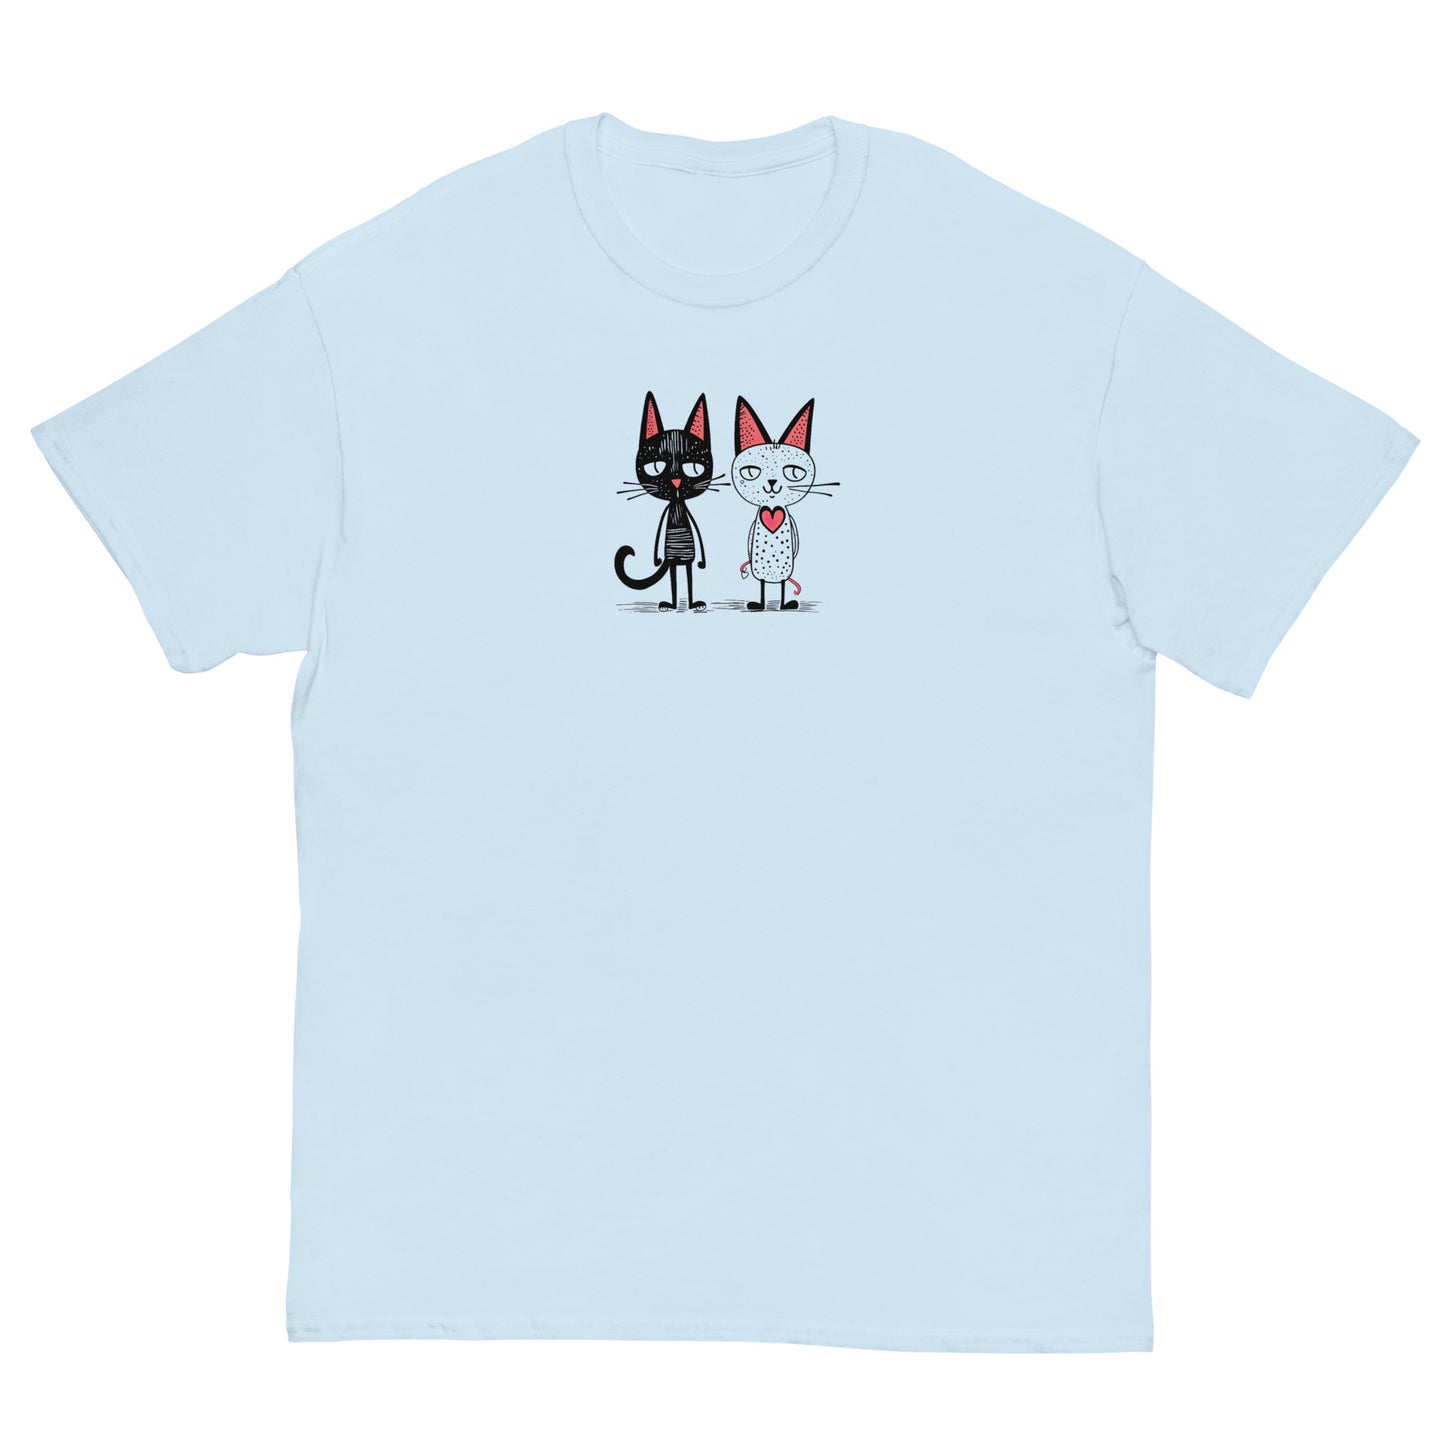 Unisex T-Shirt: Two Cats, One Heart